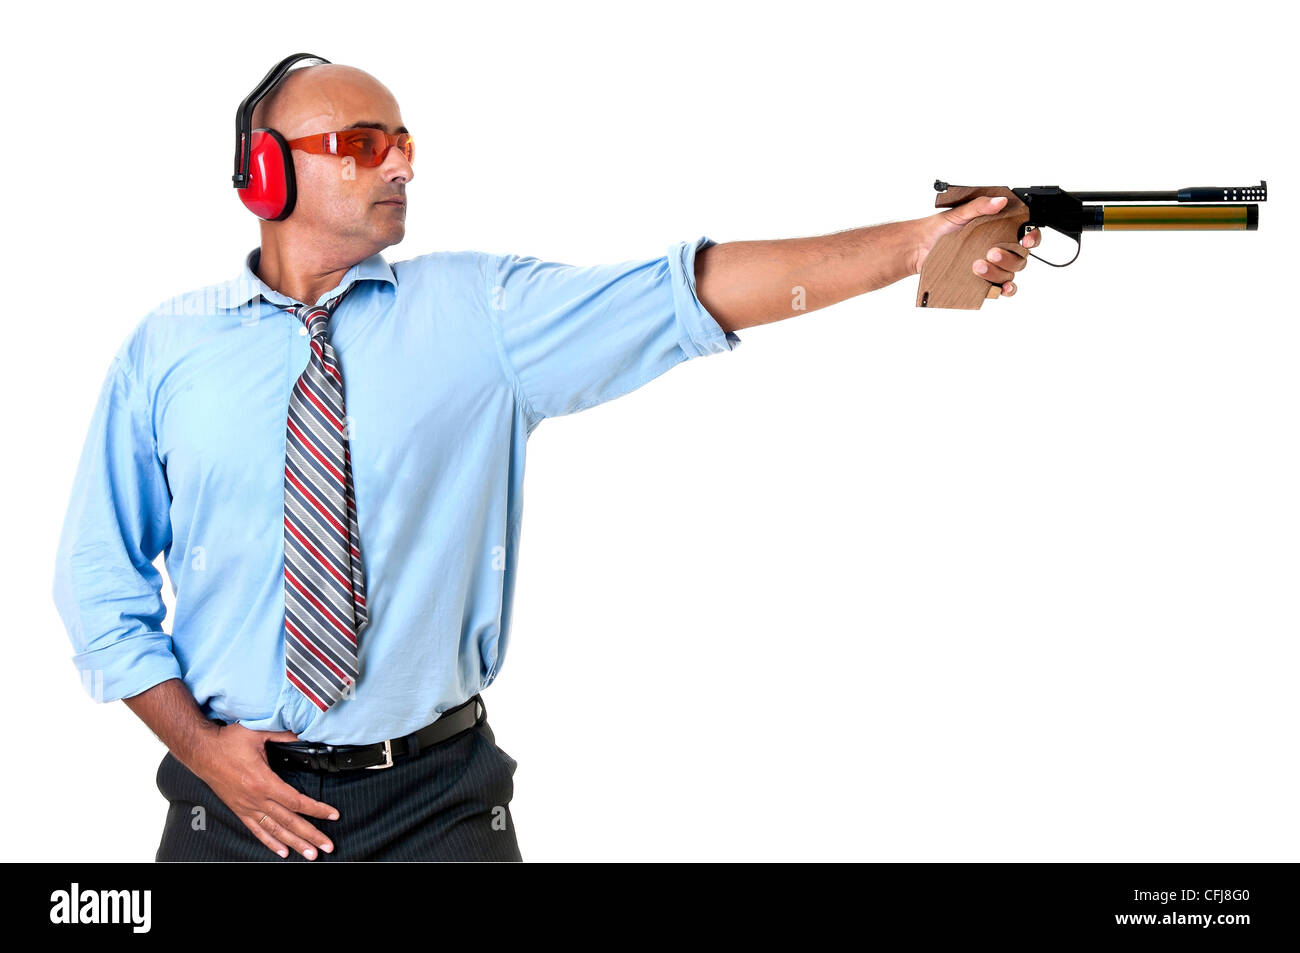 Businessman with compressed air gun shooting at a target Stock Photo